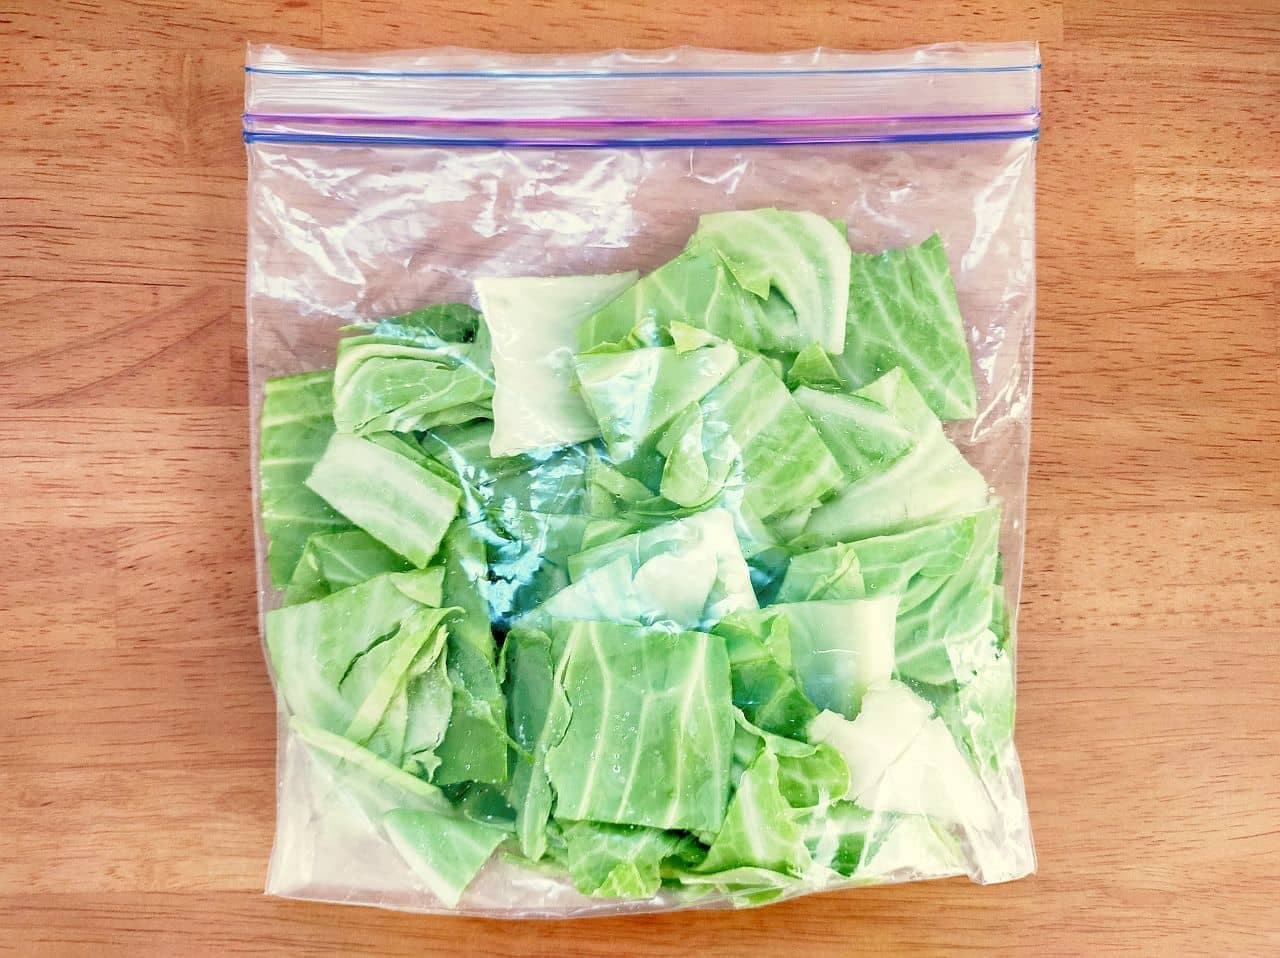 How to Store Cabbage